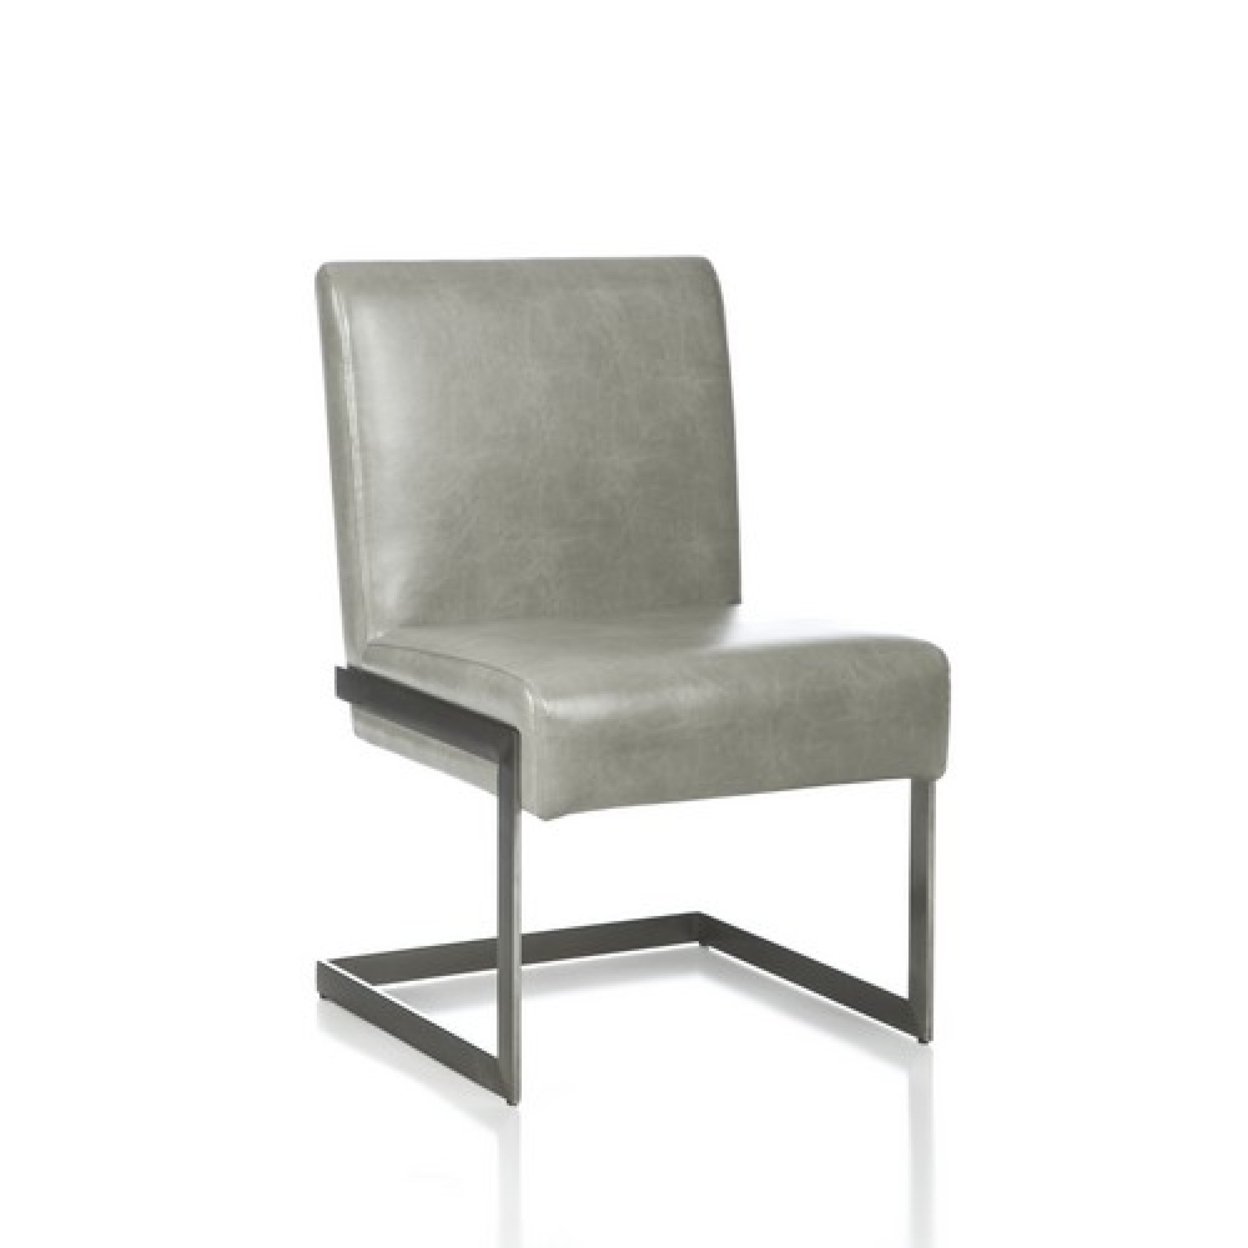 Leatherette Upholstered With Dining Chair With Cantilever Base, Gray- Saltoro Sherpi